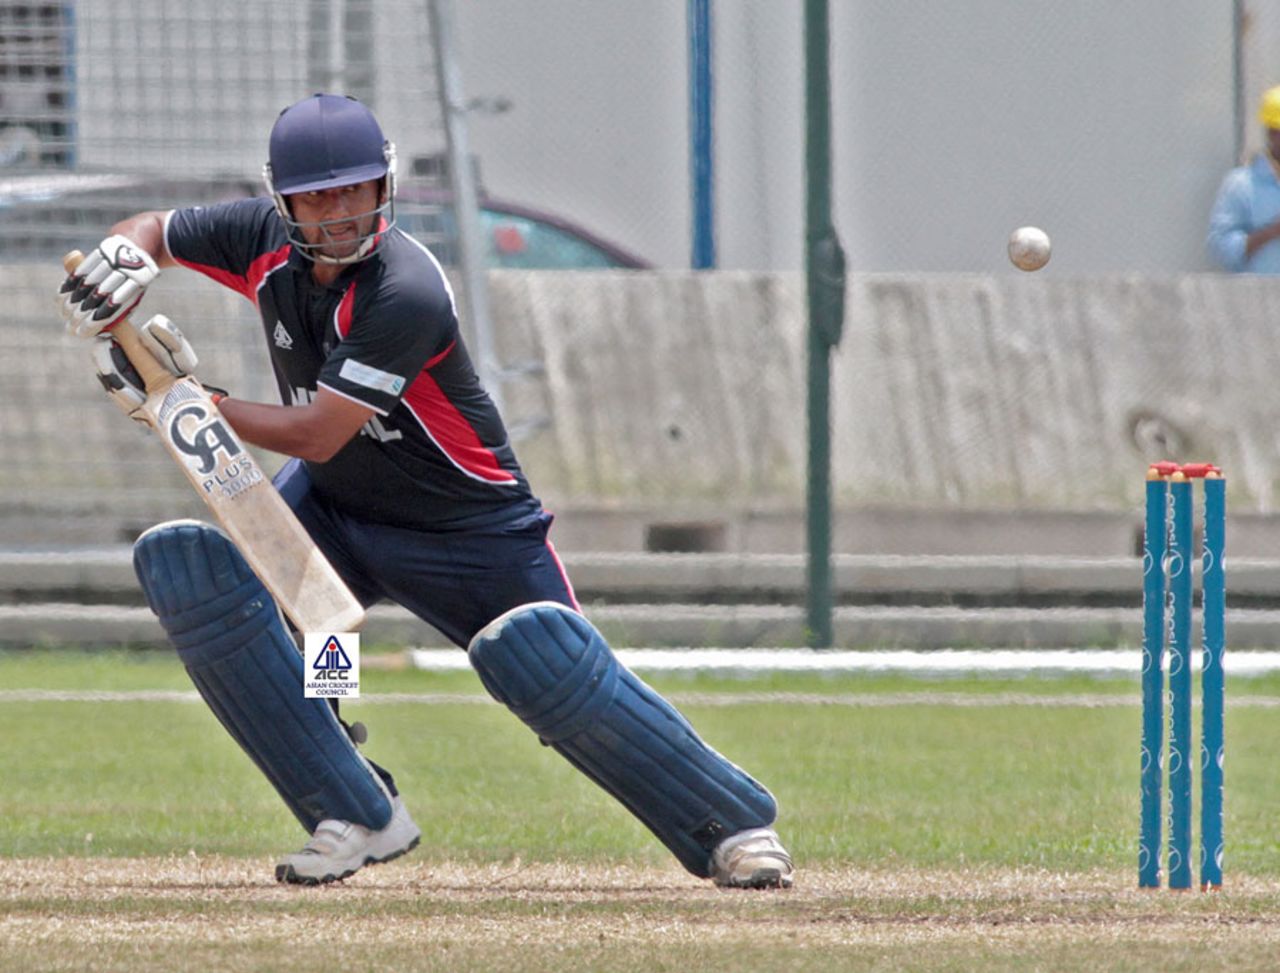 Basant Regmi steers it to the off side, Nepal v Pakistan Under-23, Group A, Asian Cricket Council Emerging Teams Cup, Singapore, August 21, 2013